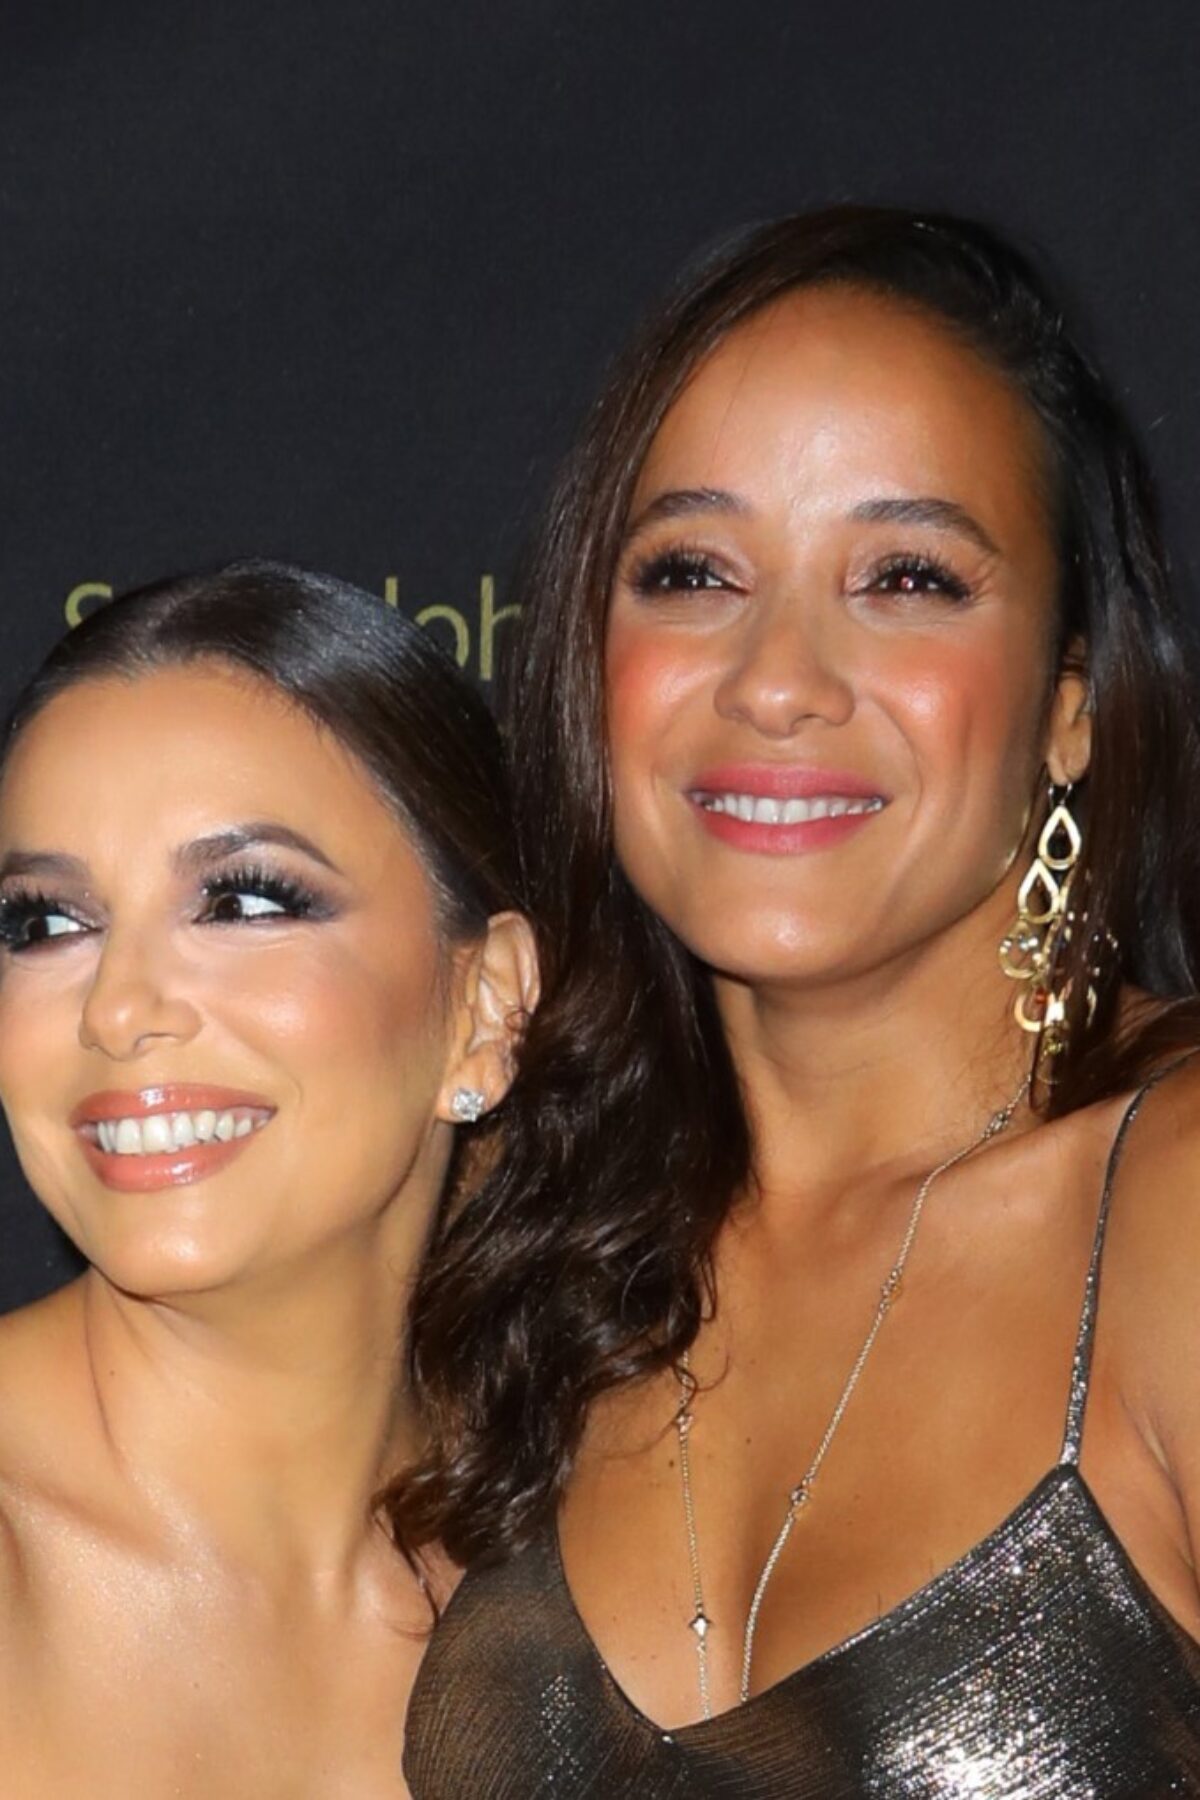 BEVERLY HILLS, CALIFORNIA - NOVEMBER 23: Actresses Eva Longoria and Dania Ramirez attend ABC's 30th Anniversary Talk Of The Town Gala at The Beverly Hilton Hotel on November 23, 2019 in Beverly Hills, California. (Photo by JC Olivera/Getty Images)